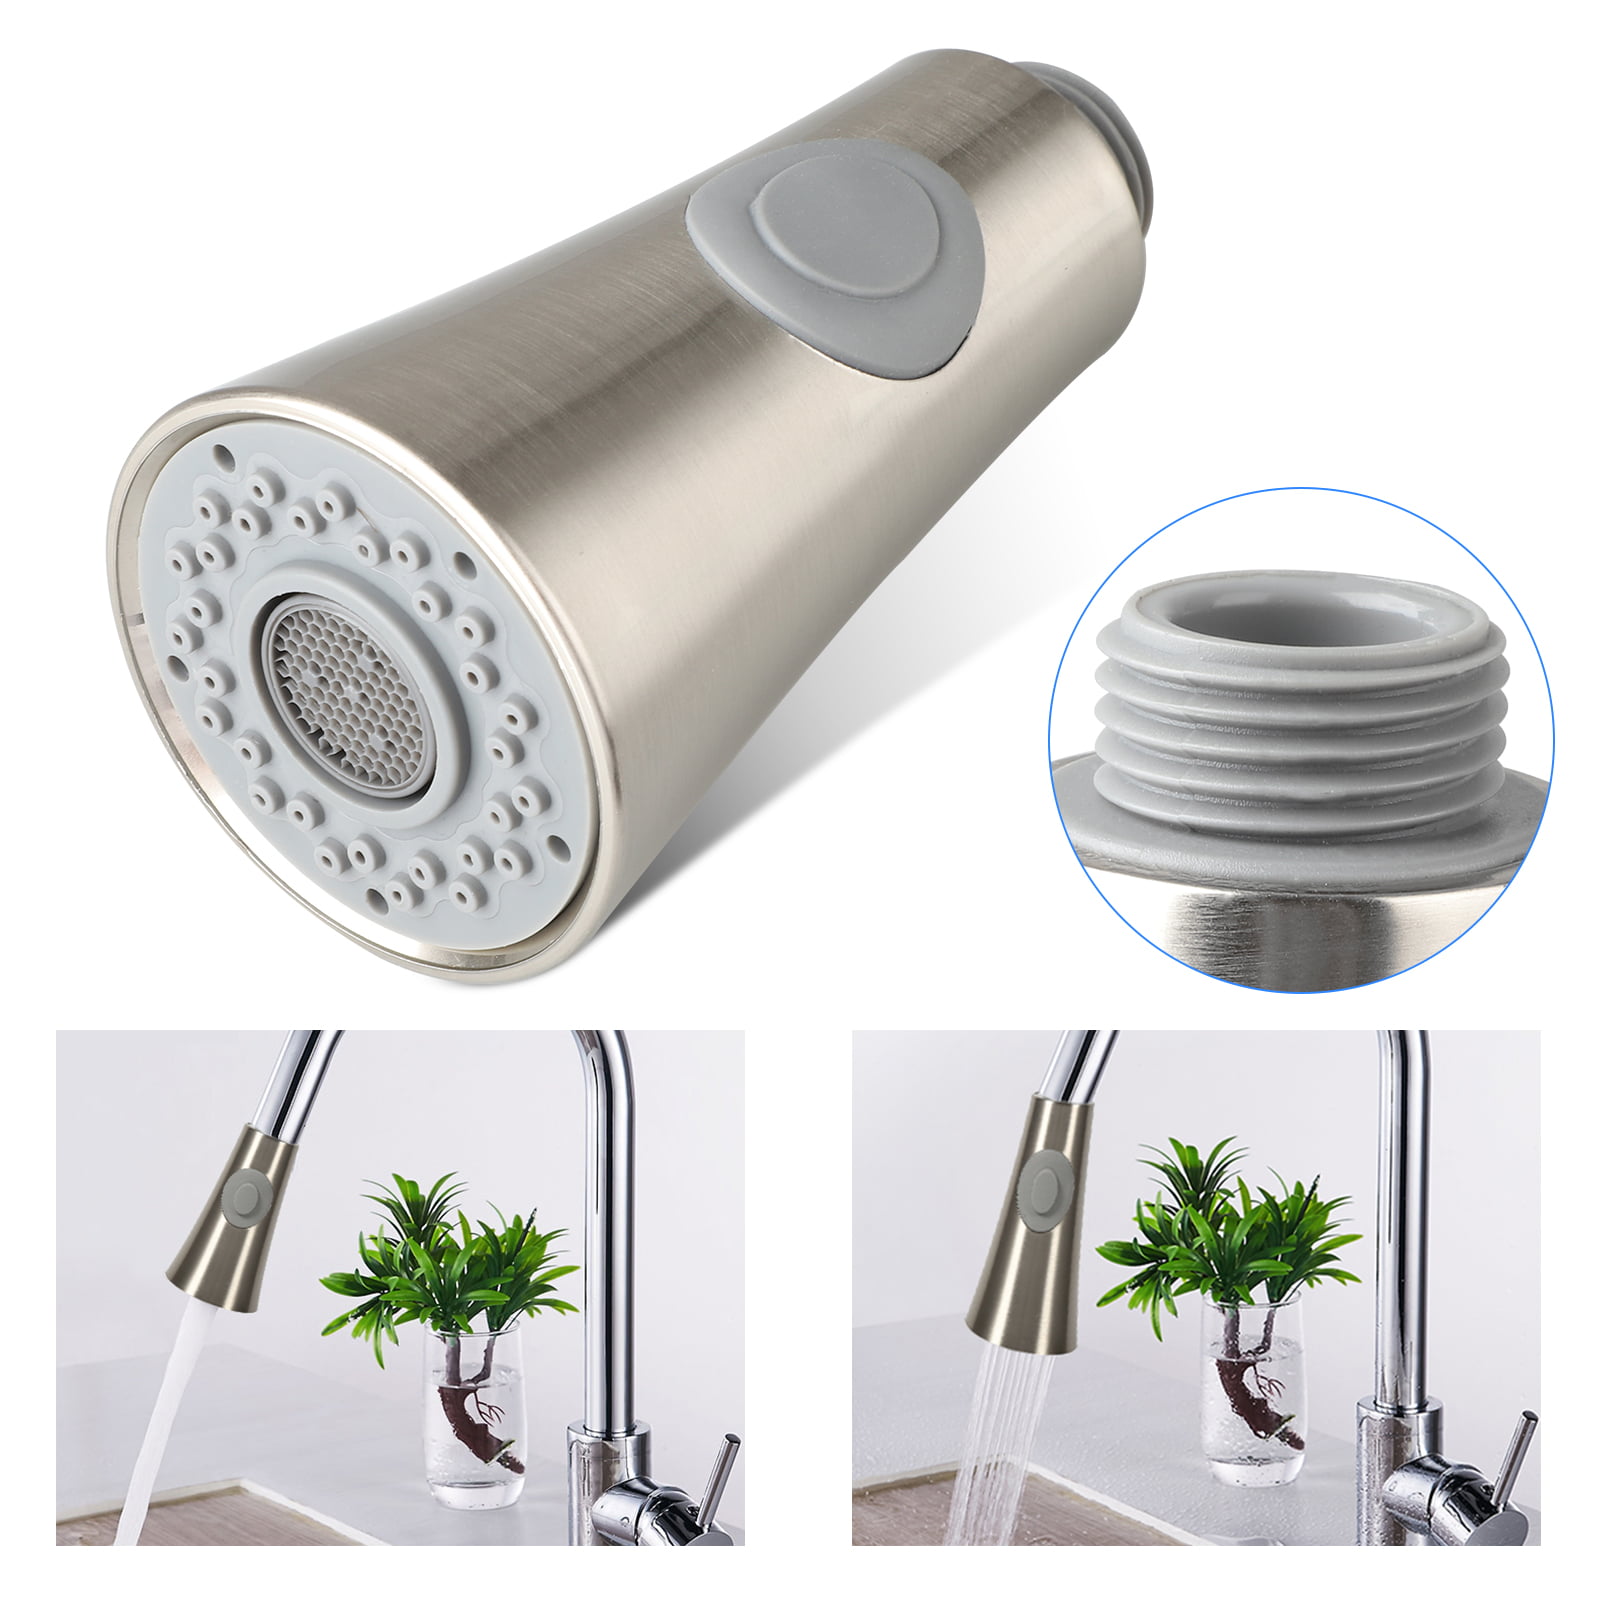 Details about   Kitchen Faucet Pull Out Sprayer Head Kitchen Sink Faucet Spray Head Nozzle1